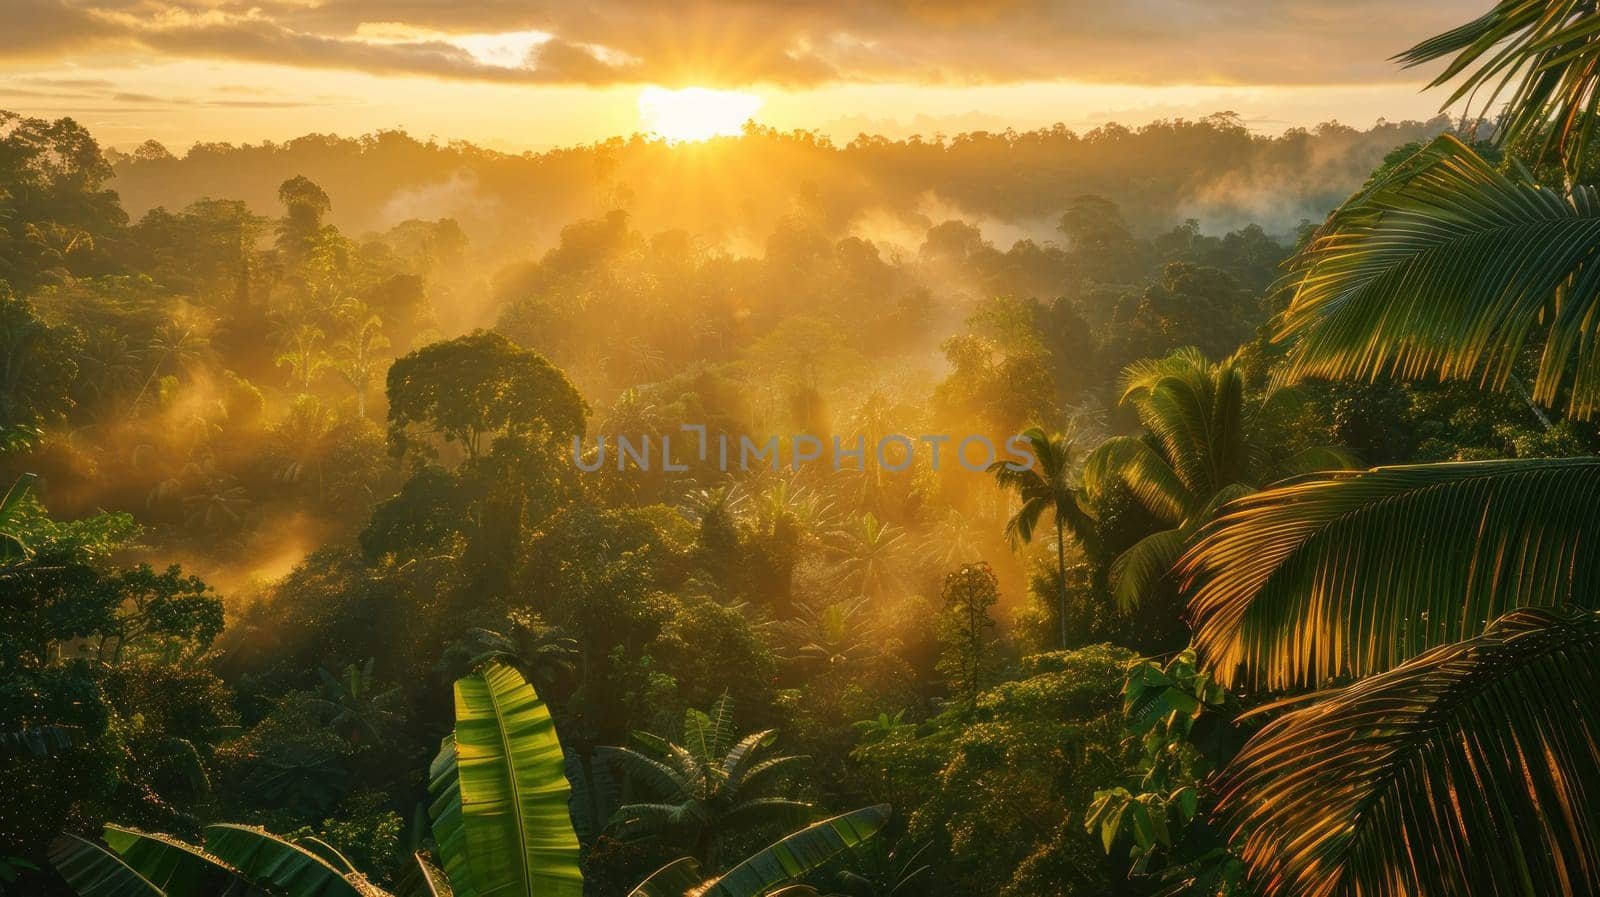 A mesmerizing sunset over a tropical rainforest, with golden sunlight filtering through lush green foliage and casting a warm glow over the tranquil landscape, capturing the magic and beauty of by golfmerrymaker